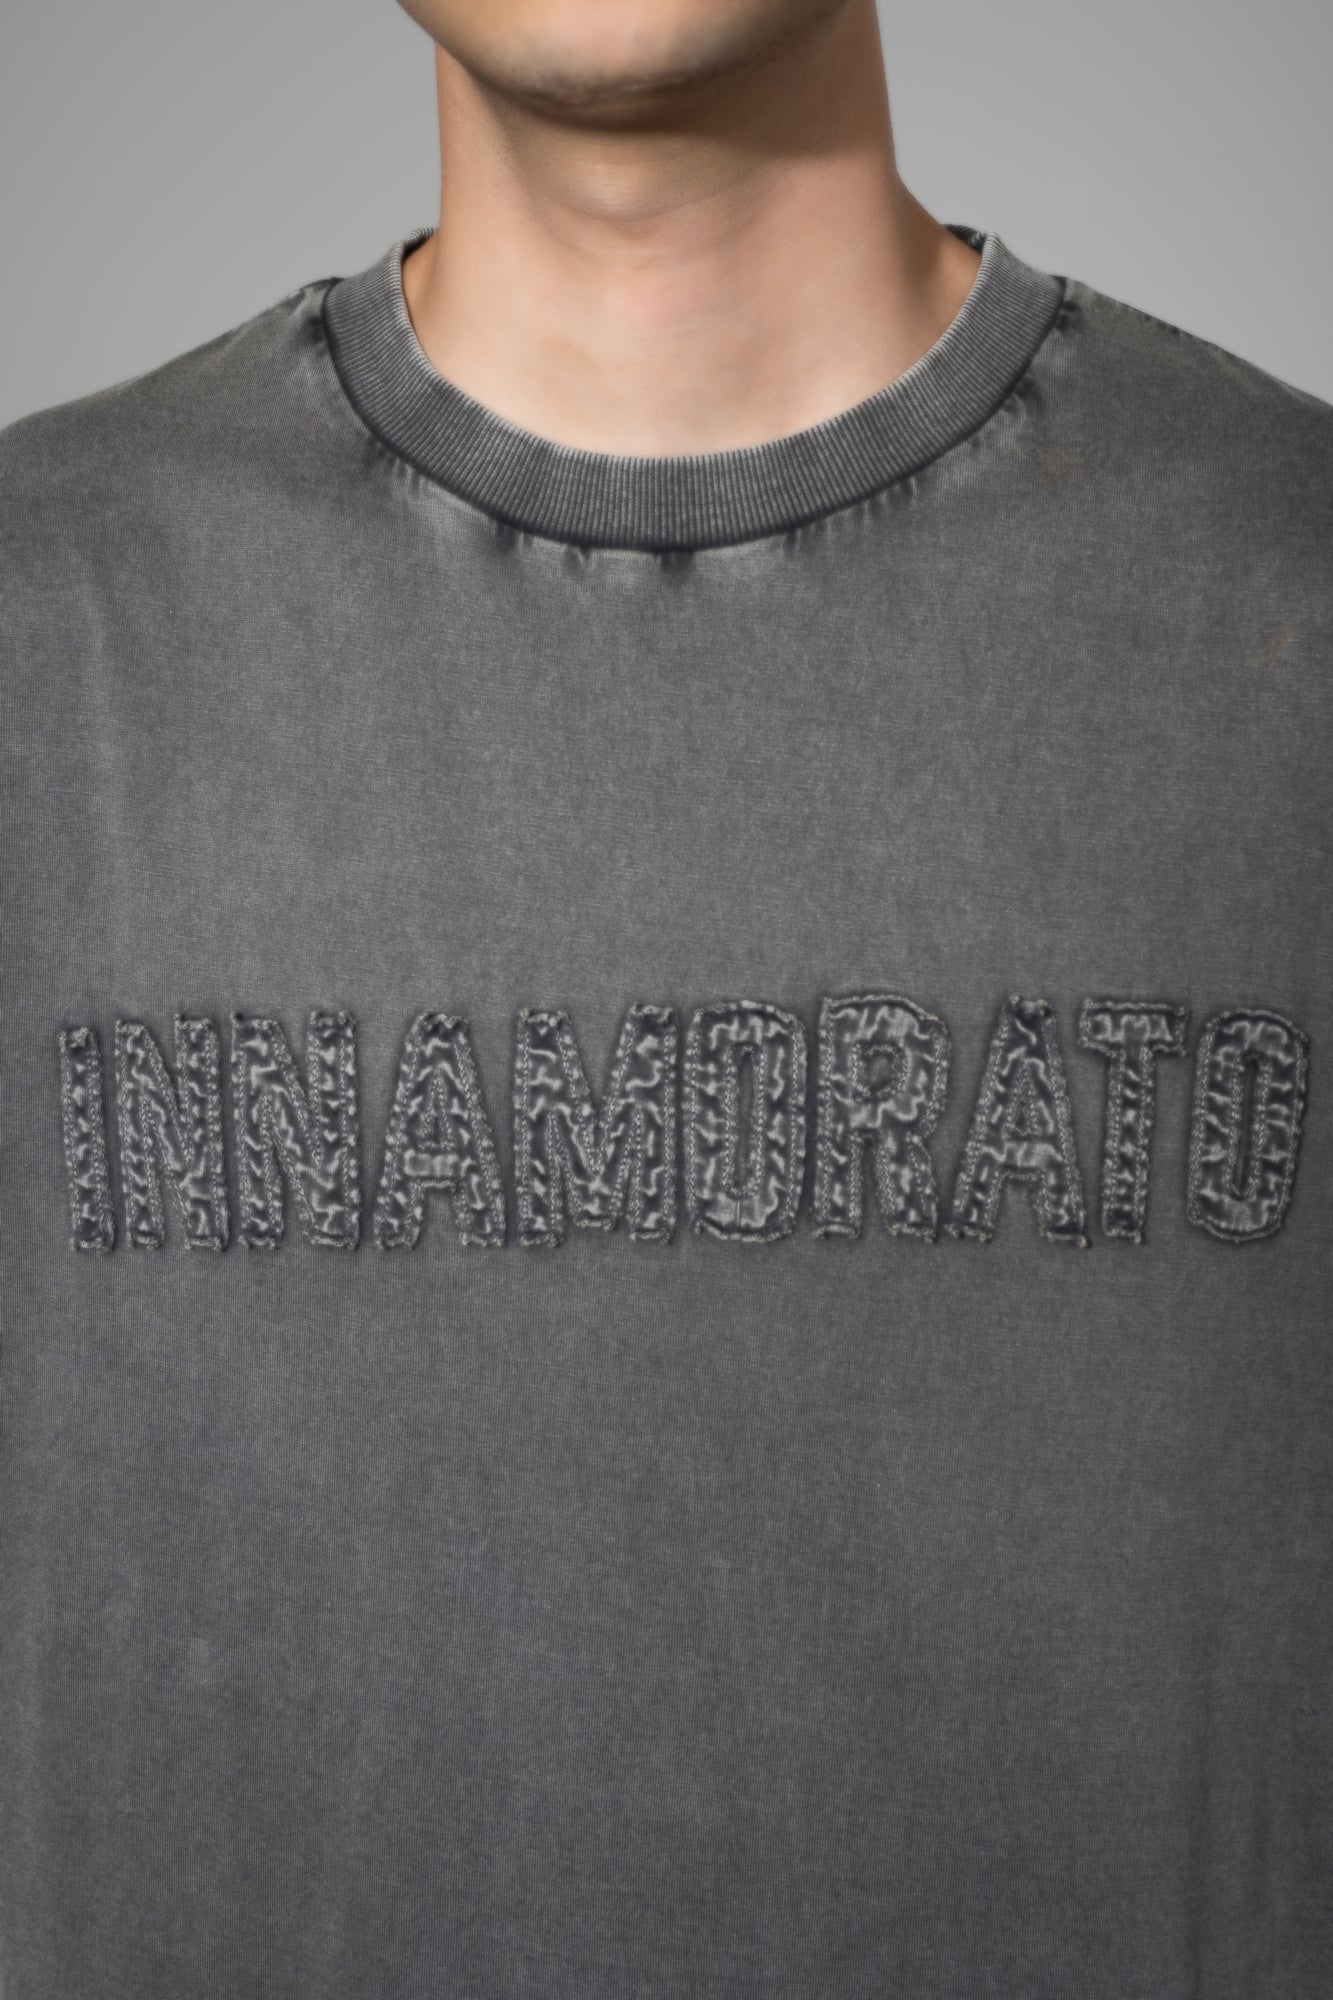 Drop shoulder mineral washed cotton t-shirt from https://innamoratoclo.com